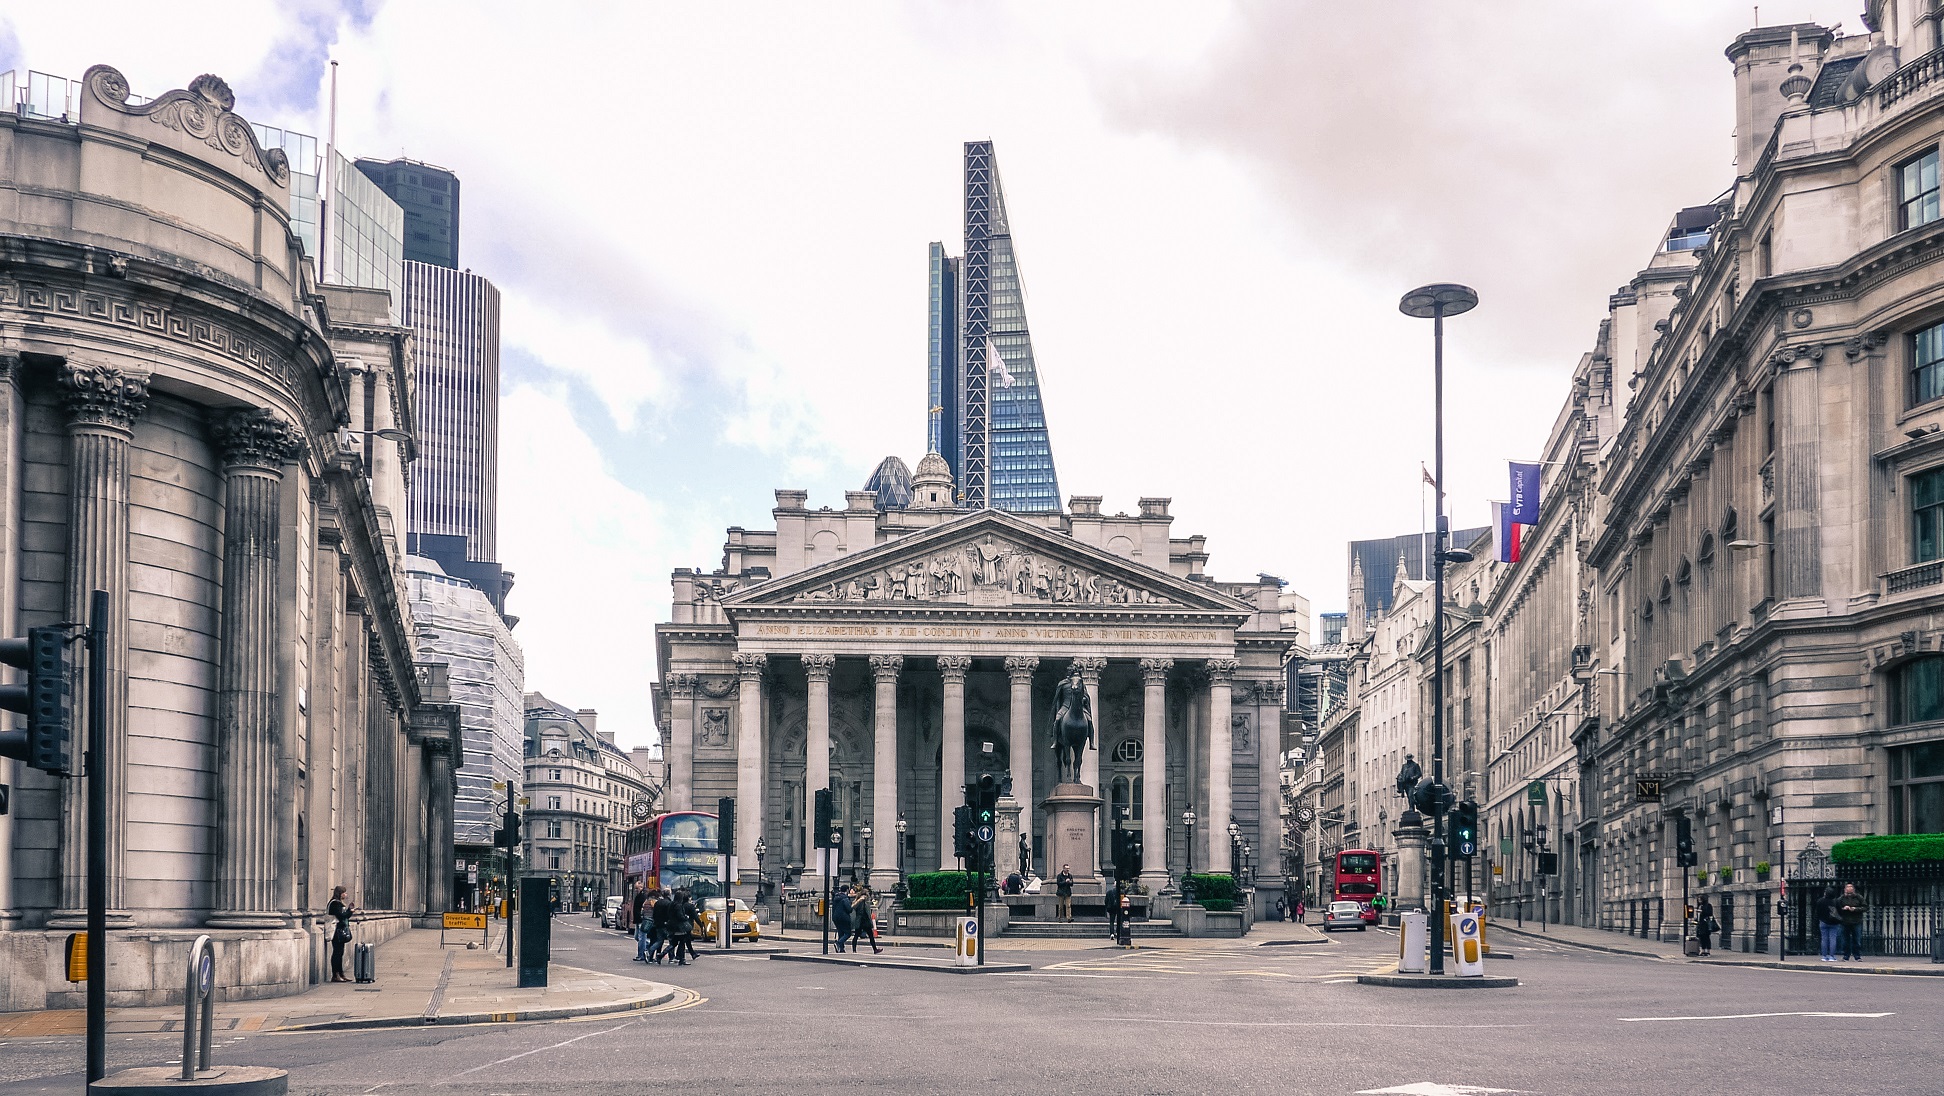 The old Stock Exchange Building, London